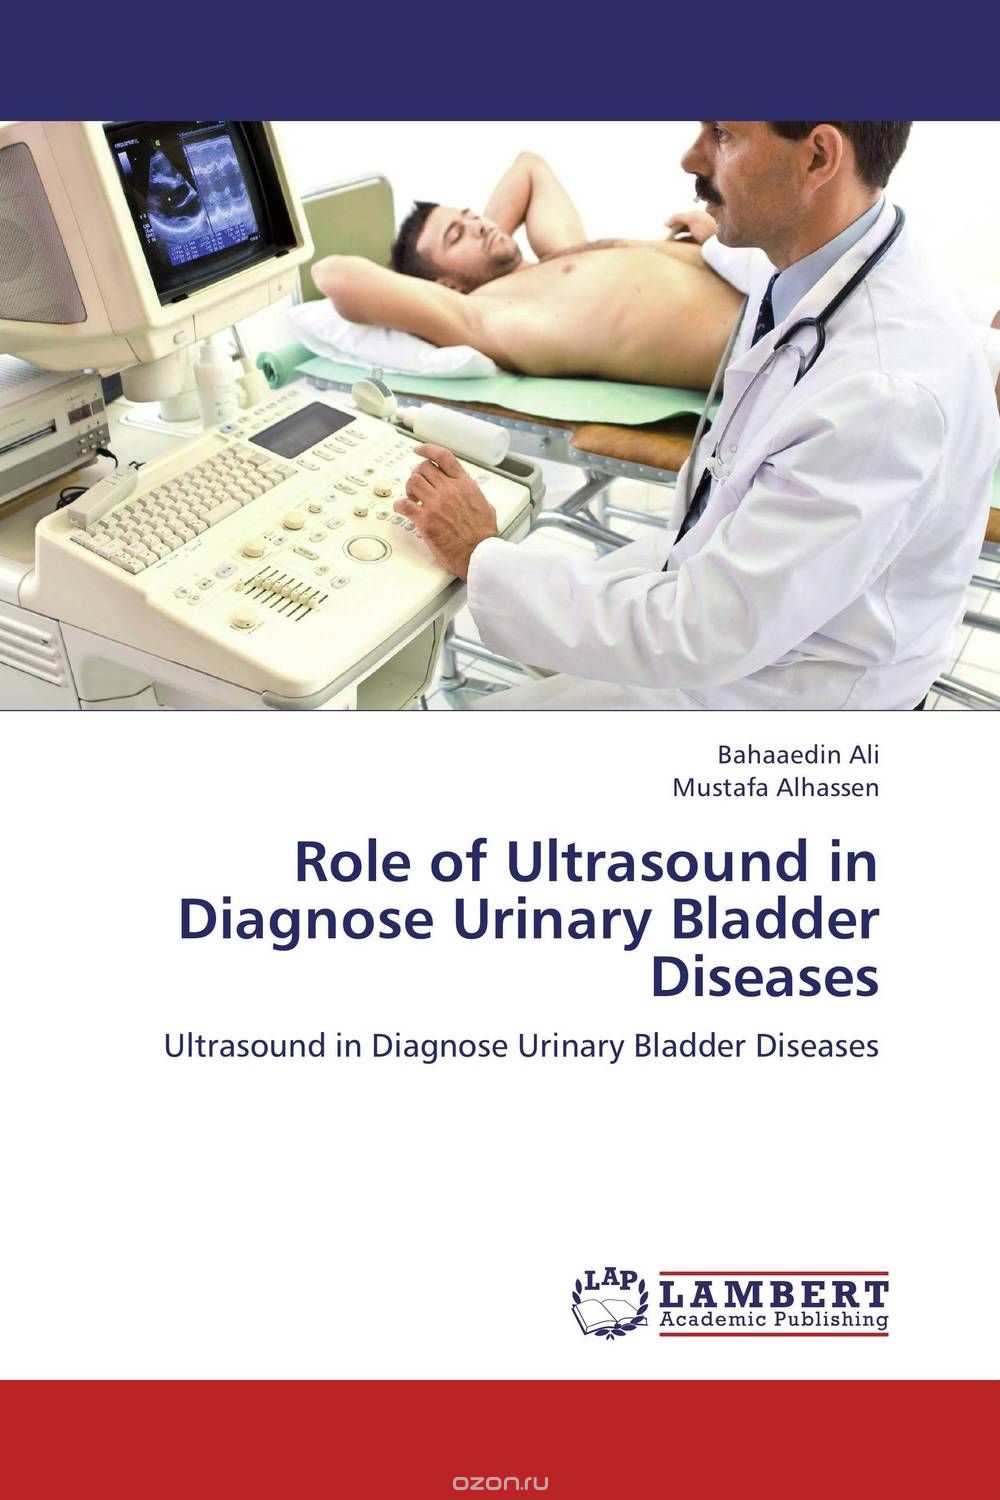 Role of Ultrasound in Diagnose Urinary Bladder Diseases